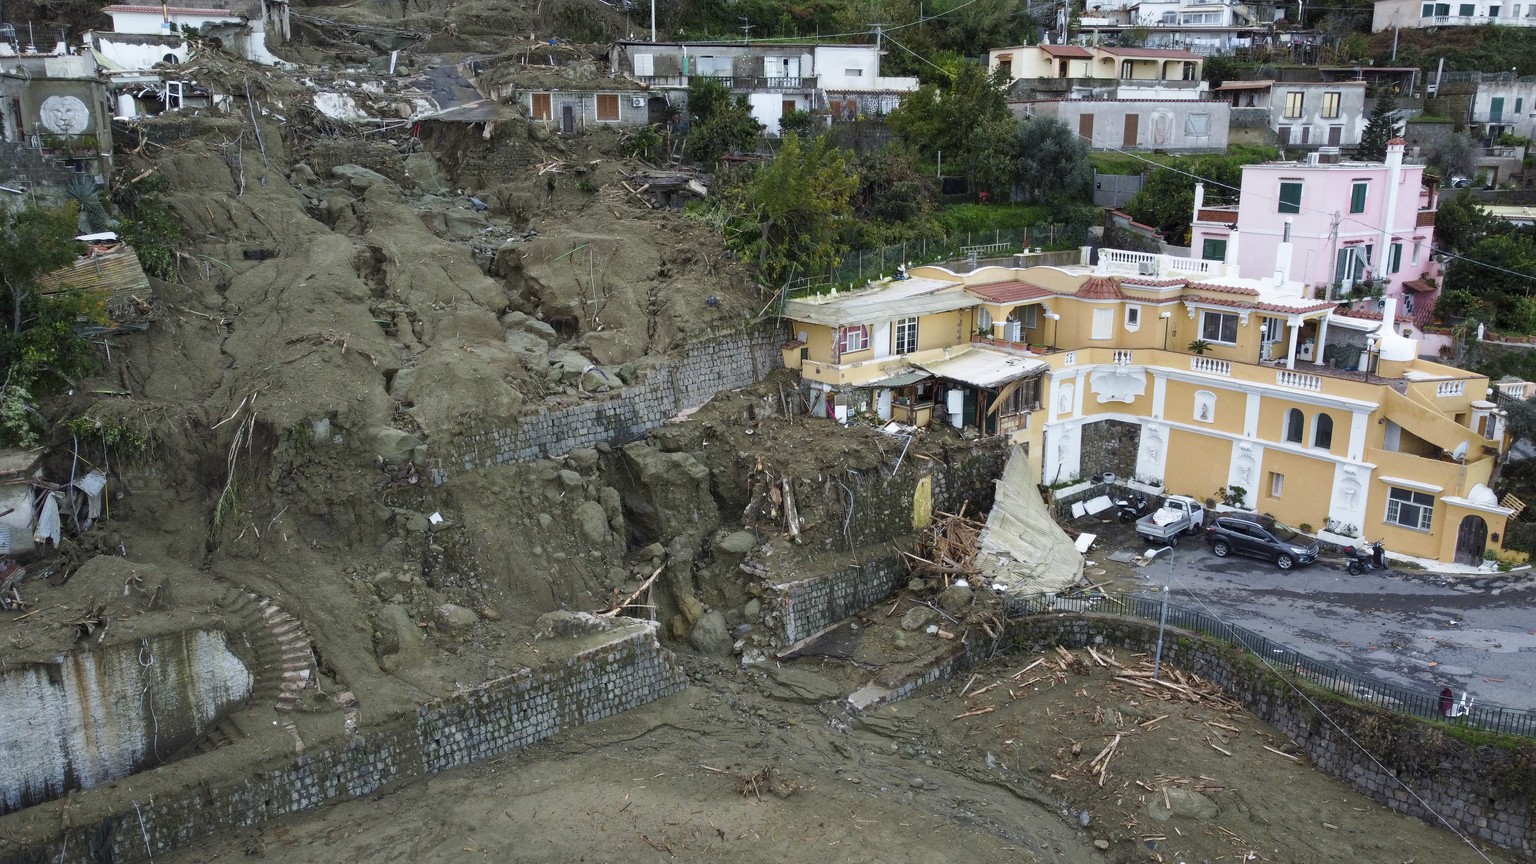 An aerial view of damaged houses after heavy rainfall triggered landslides that collapsed buildings and left as many as 12 people missing, in Casamicciola, on the southern Italian island of Ischia, Su ...